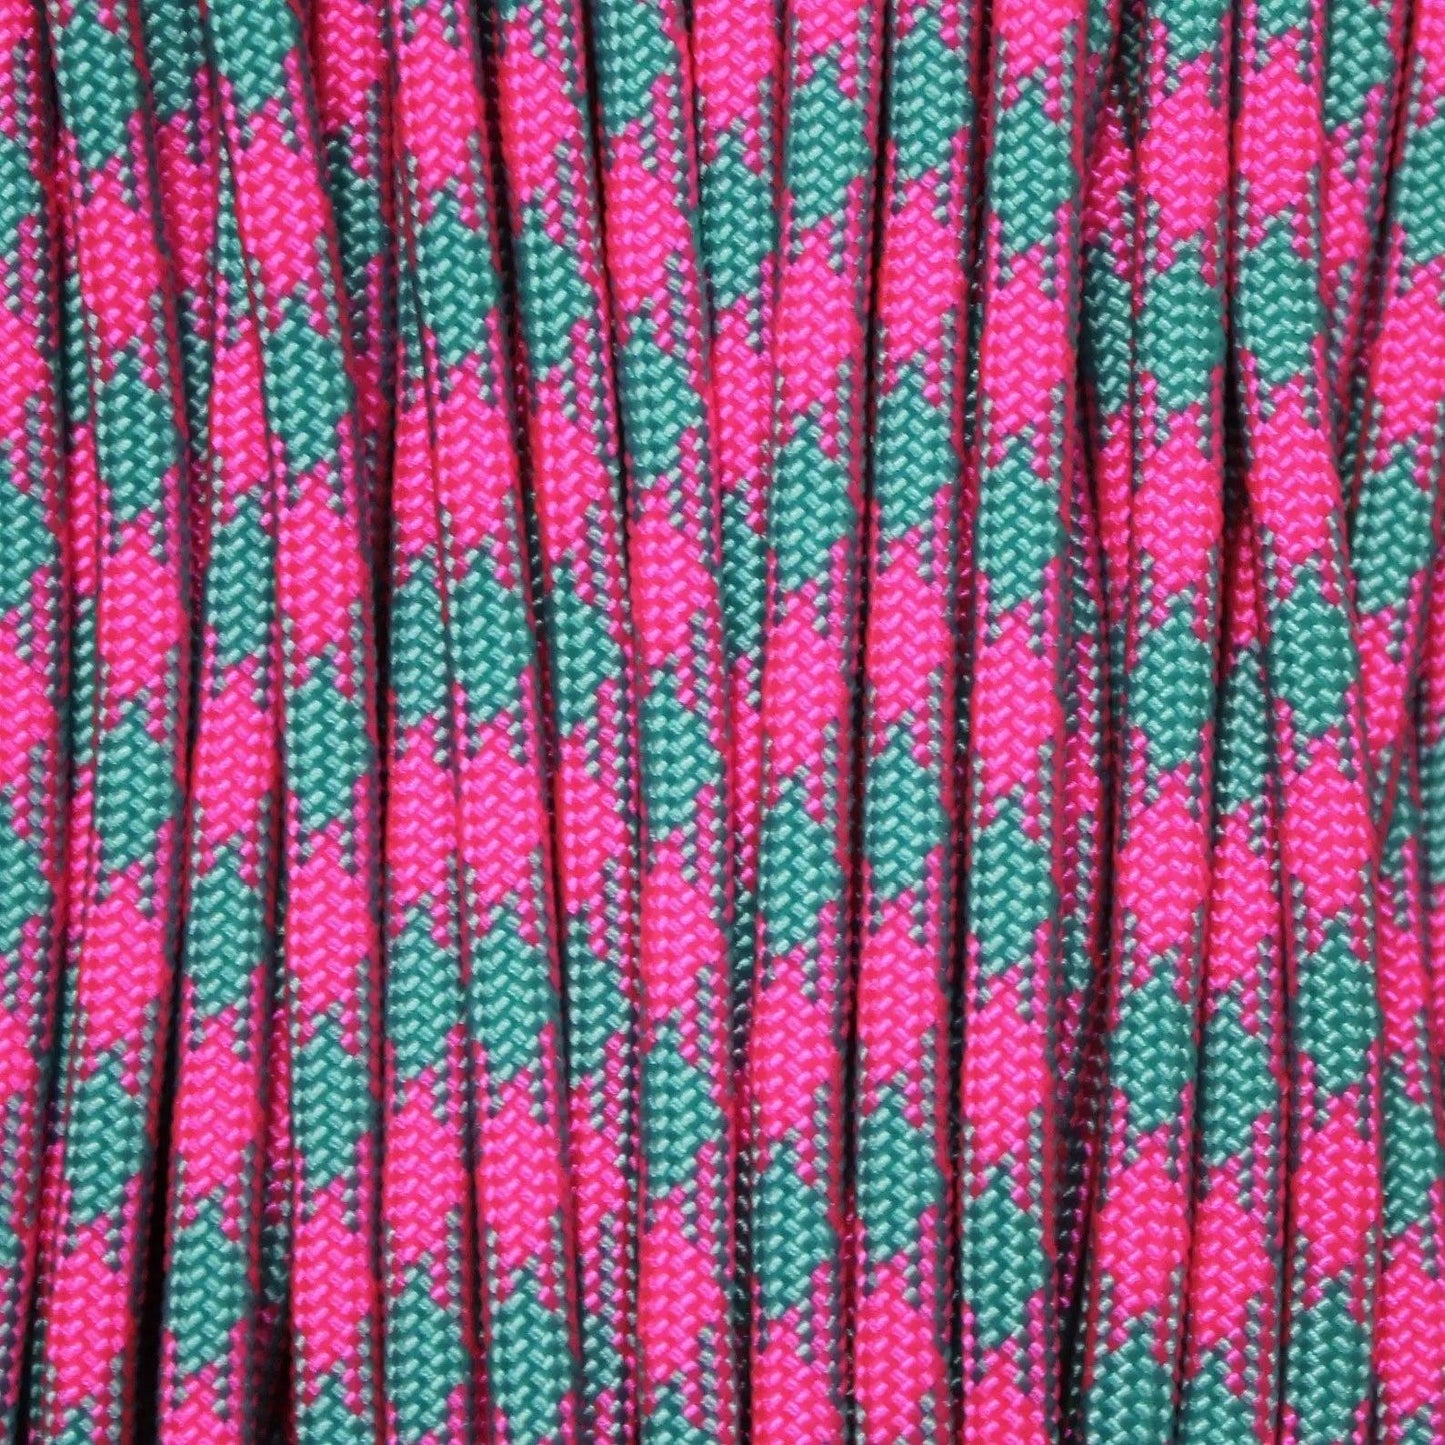 550 Paracord Cotton Candy Made in the USA Nylon/Nylon - Paracord Galaxy